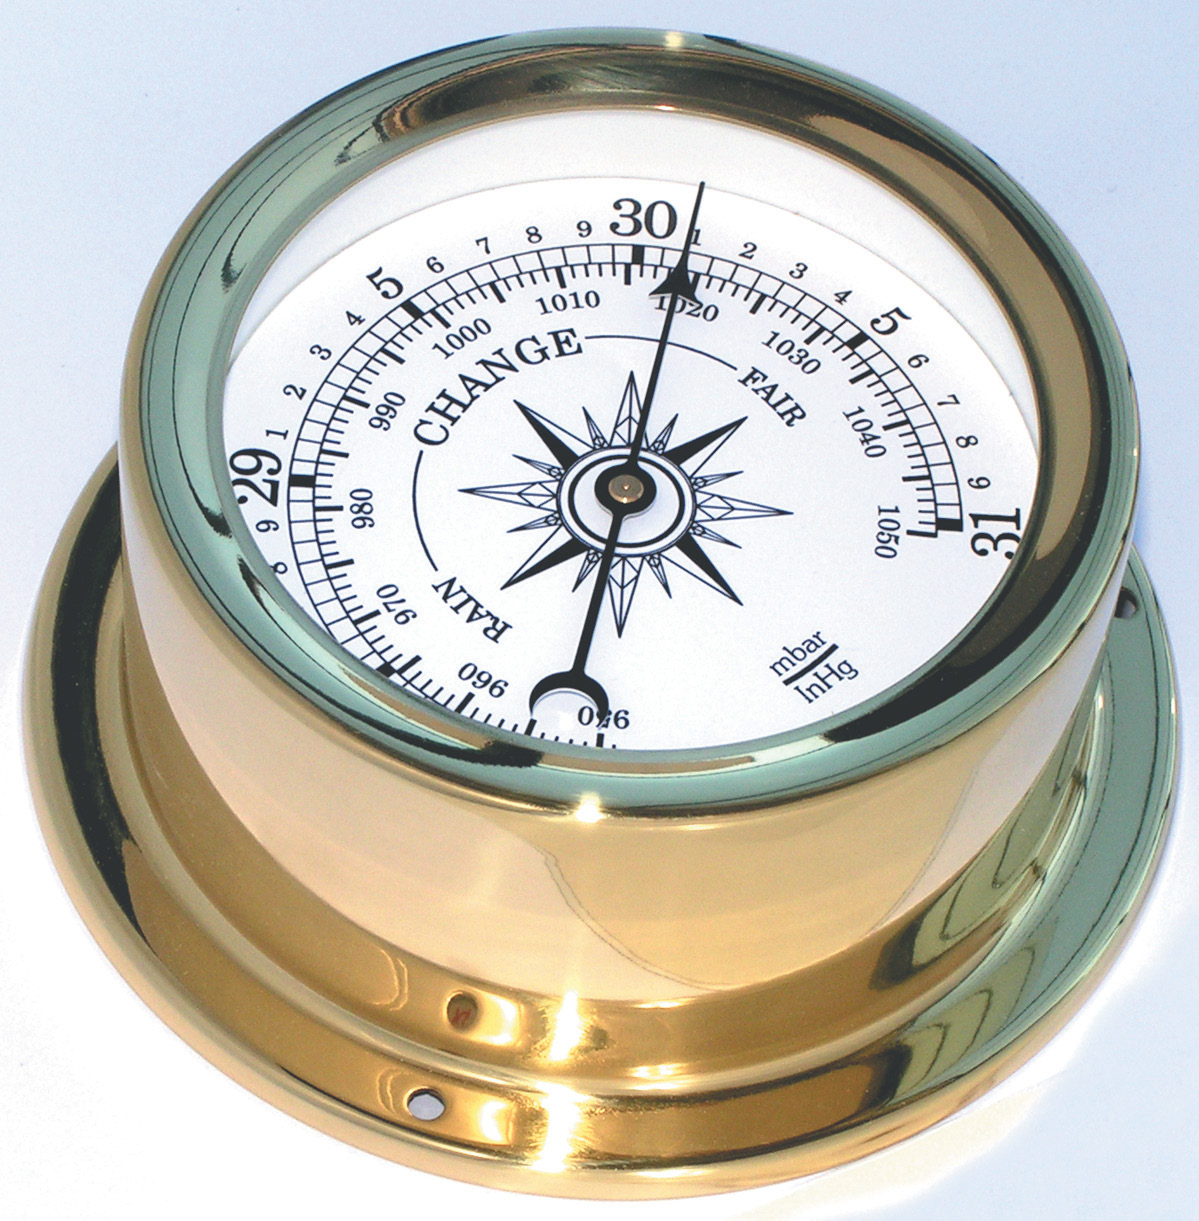 _Science And Technology_: Instruments for Measuring Atmospheric Pressure - EUR 04 AneroiD Barometer